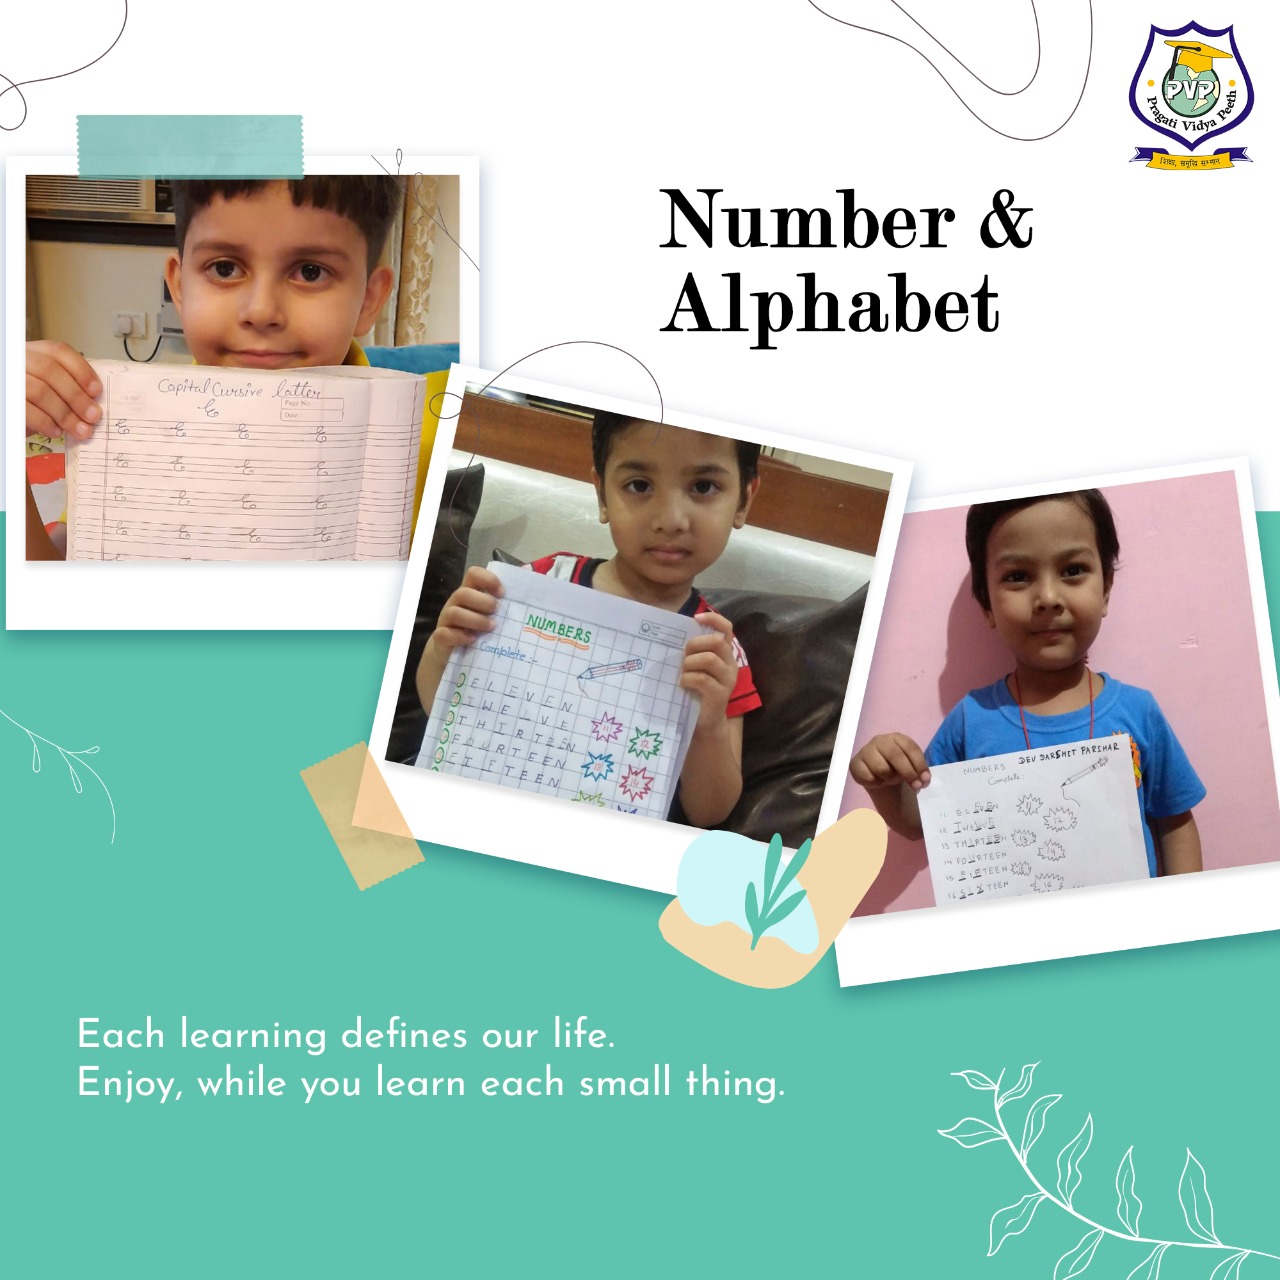 Number and Alphabet